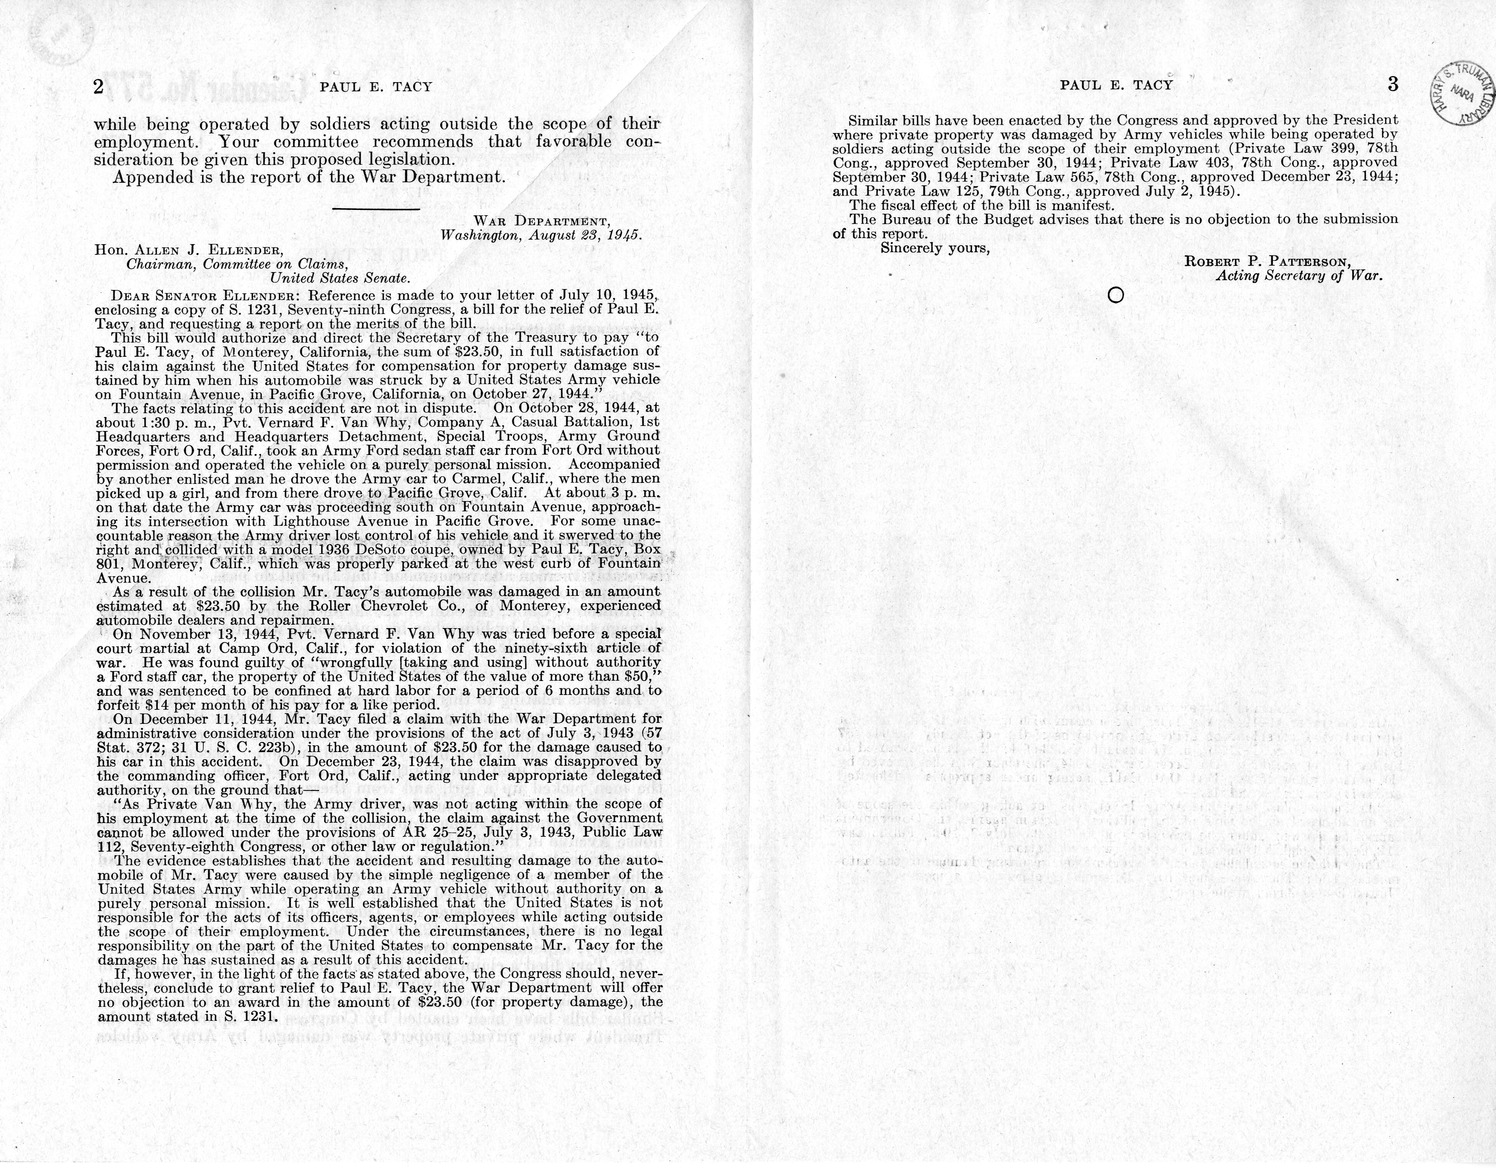 Memorandum from Harold D. Smith to M. C. Latta, S. 1231, For the Relief of Paul E. Tacy, with Attachments